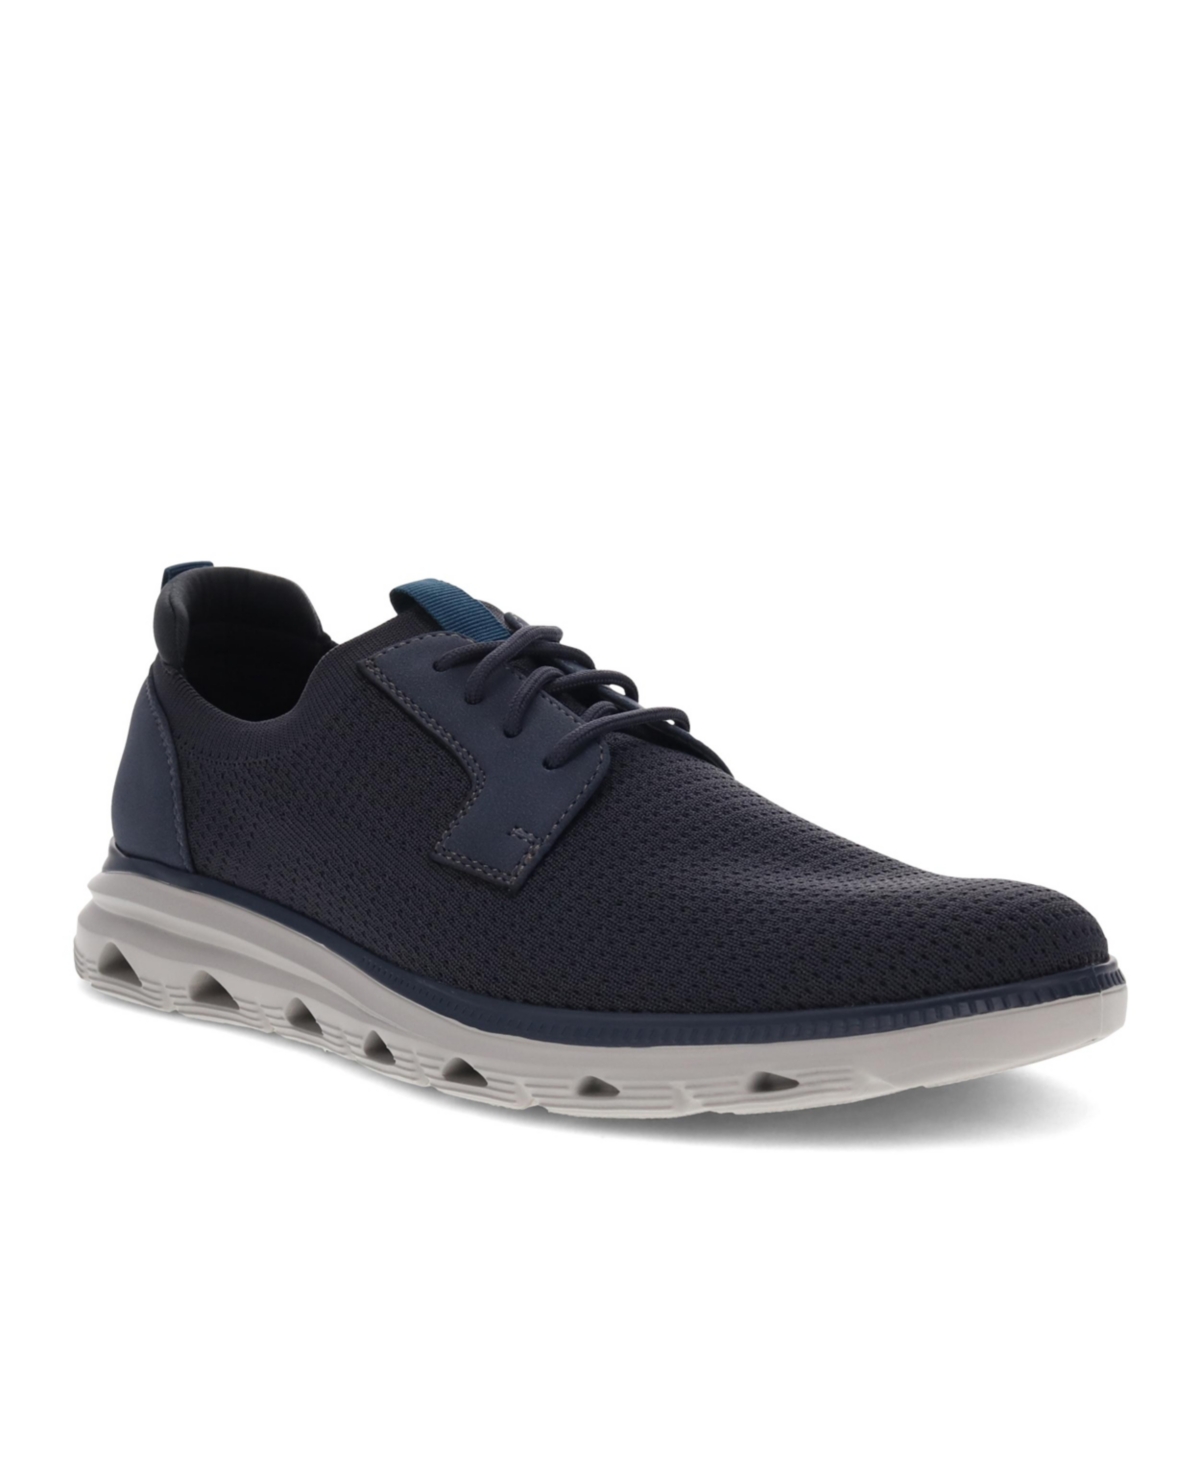 Men's Fielding Casual Oxford Shoes - Gray